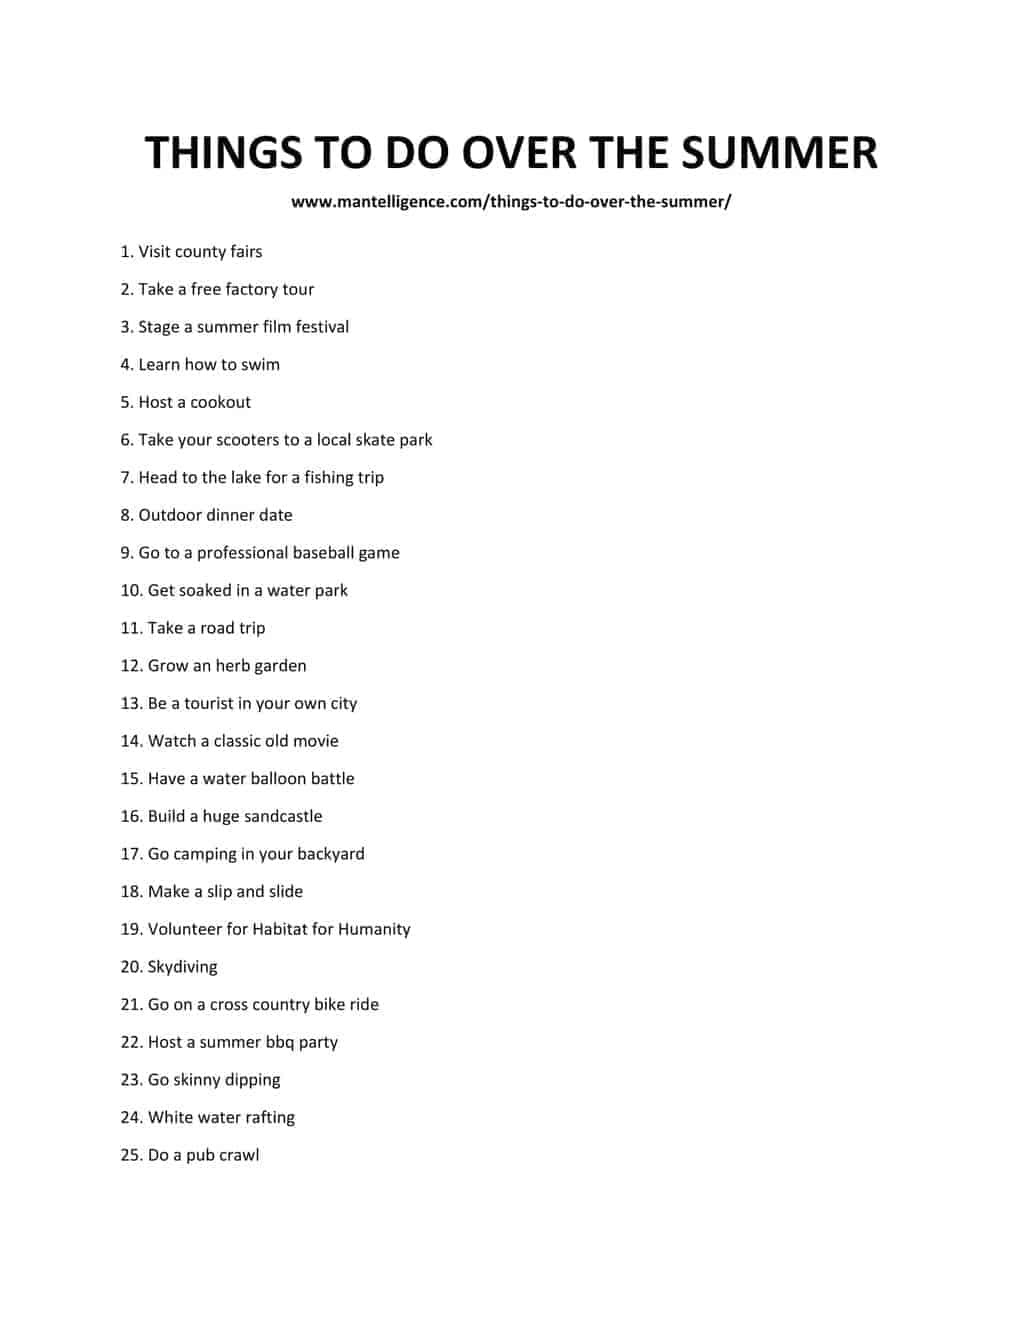 THINGS_TO_DO_OVER_THE_SUMMER-1[1]